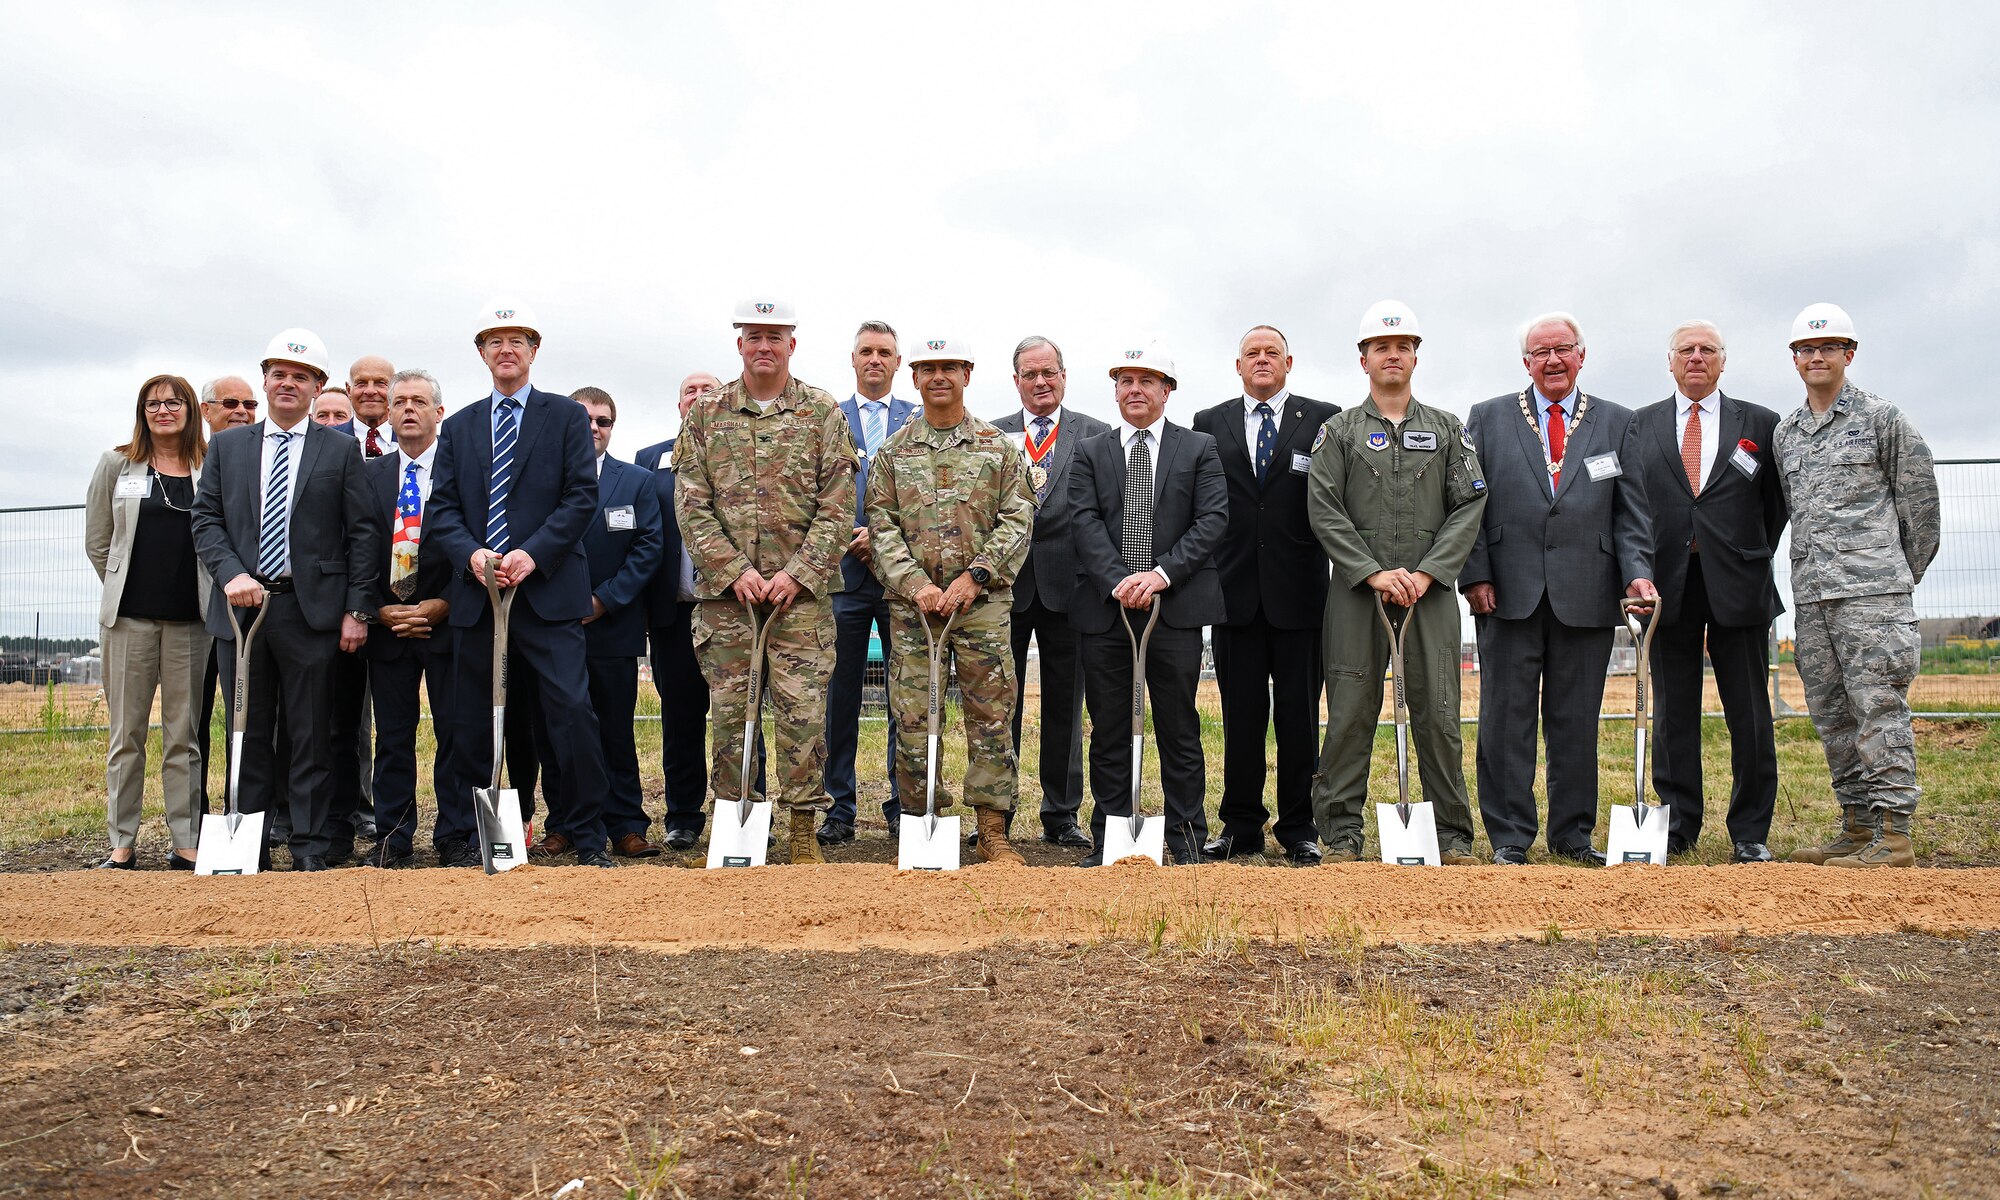 General Jeffrey L. Harrigian, U.S. Air Forces in Europe and Air Forces Africa commander, (center), poses for a photo with 48th Fighter Wing personnel and local civic leaders, partners and contractors during an F-35 groundbreaking ceremony at RAF Lakenheath, England, July 15, 2019. Through the partnership with the Defence Infrastructure Organisation, as well as Kier and VolkerFitzpatrick construction groups, the installation will be ready to welcome the first F-35A Lightning II aircraft in late 2021. (U.S. Air Force photo by Airman 1st Class Shanice Williams-Jones)